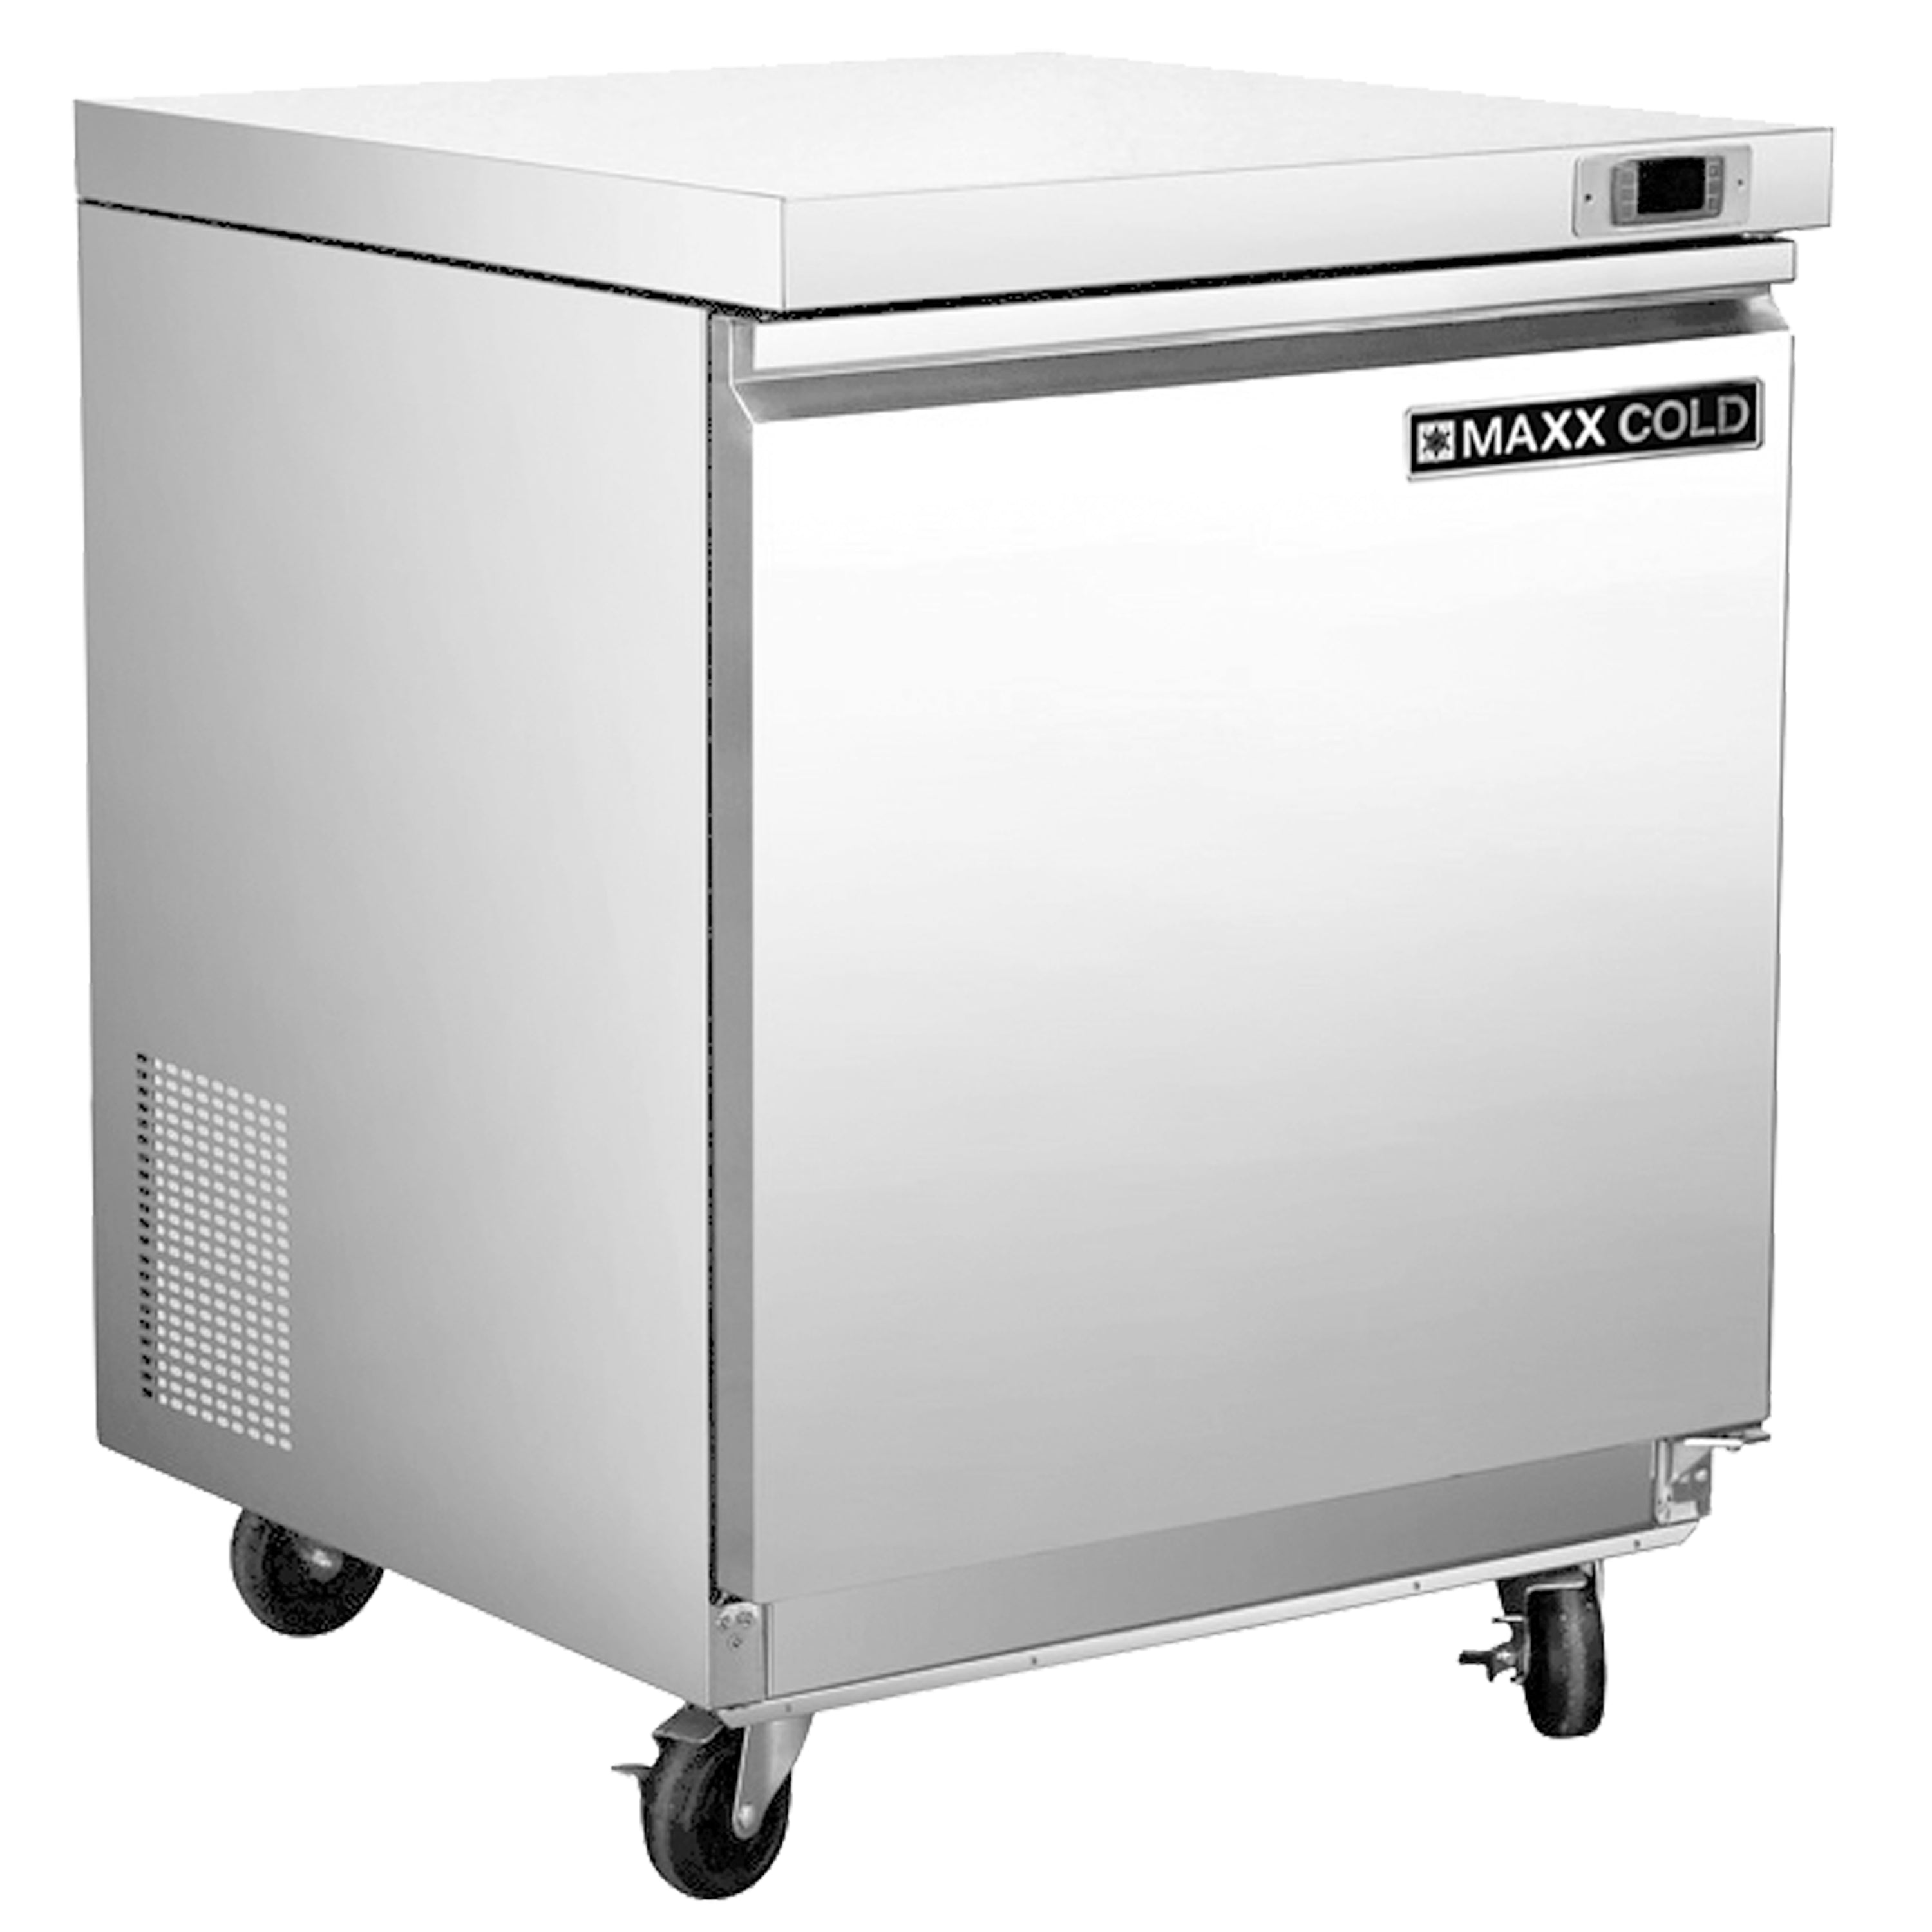 Maxx Cold - MXSR29UHC, Maxx Cold Single Undercounter Refrigerator, 29" W, 6.7 cu. ft Storage Capacity, in Stainless Steel